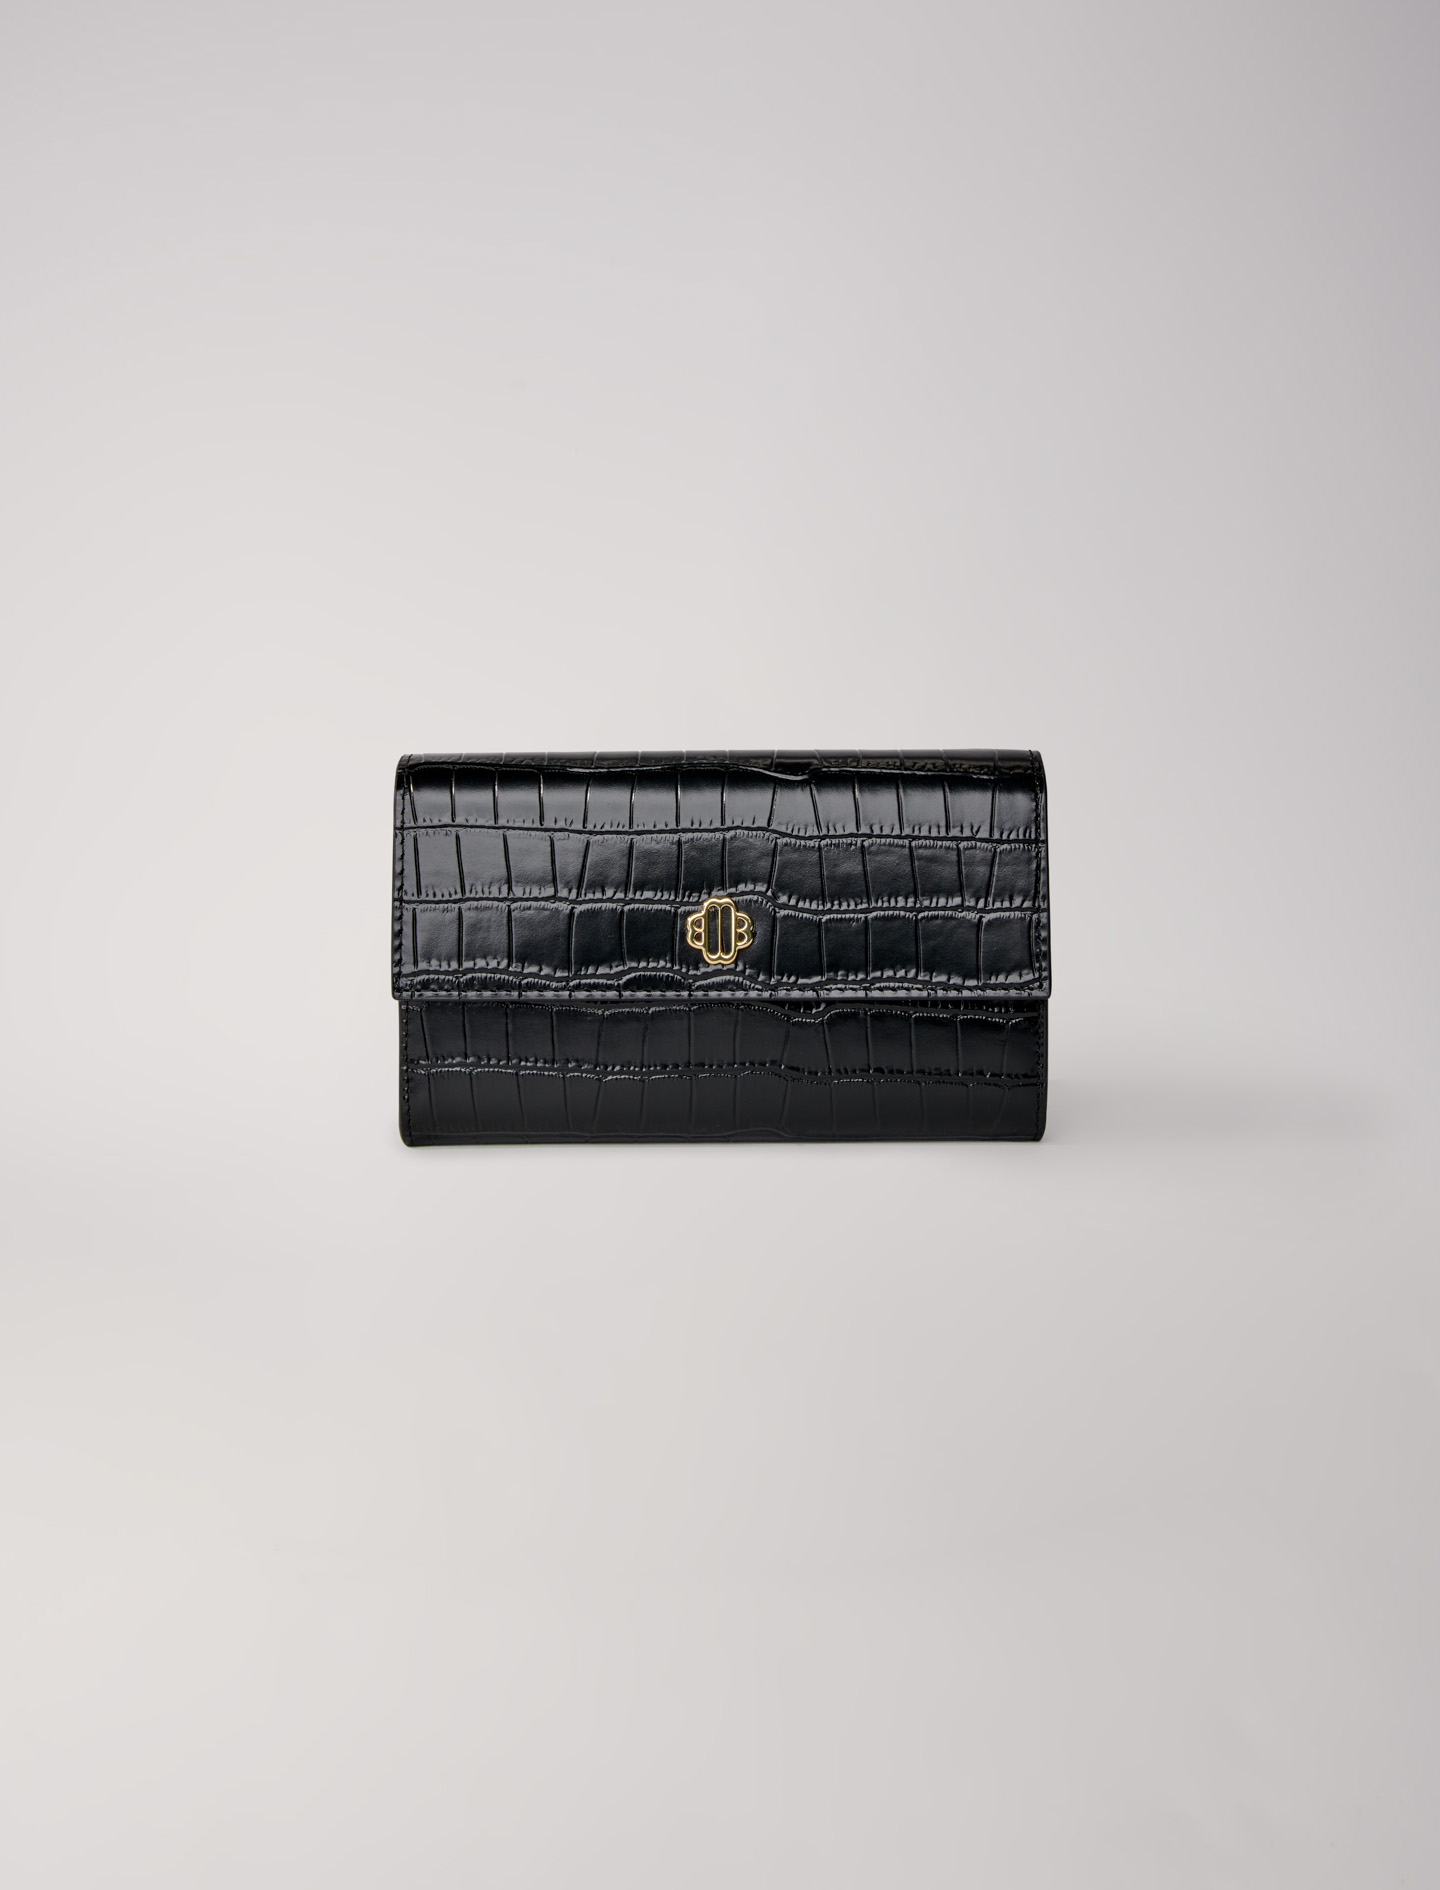 Maje Woman's polyester, Croc-effect embossed leather bag for Fall/Winter, in color Black / Black